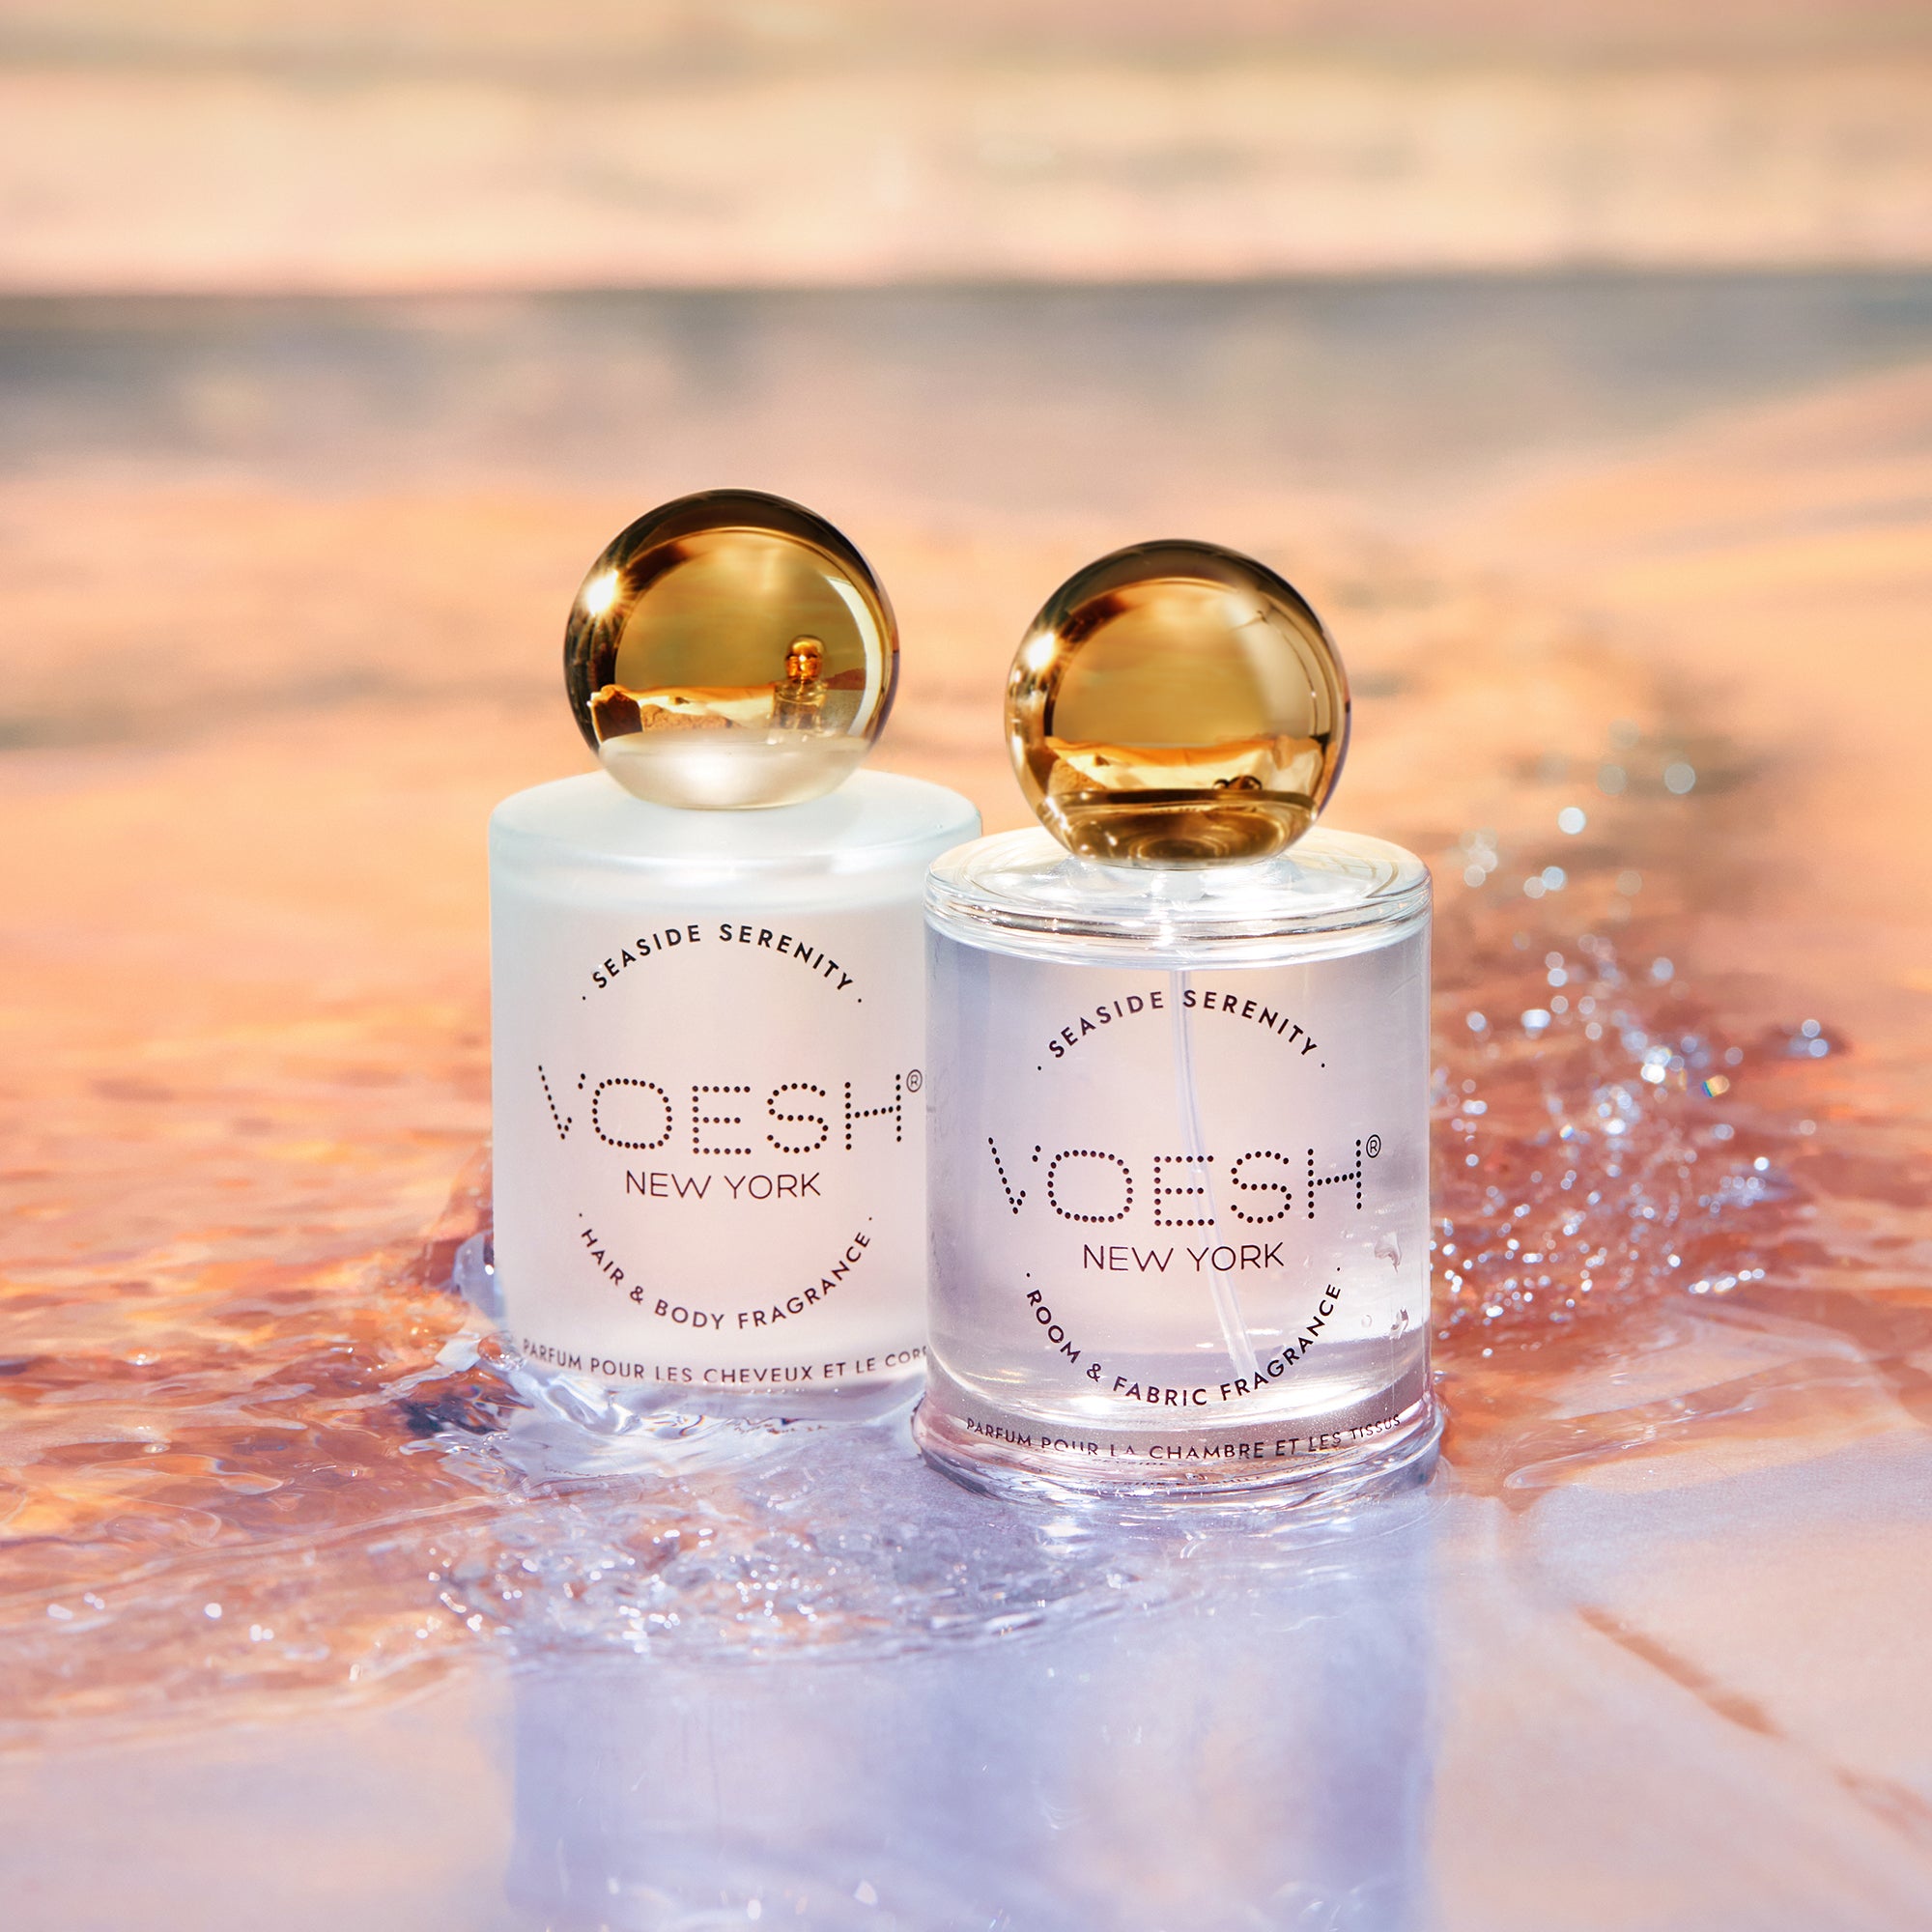 Hair & Body Fragrance and Room & Fabric Fragrance on top of water with a beachy background.